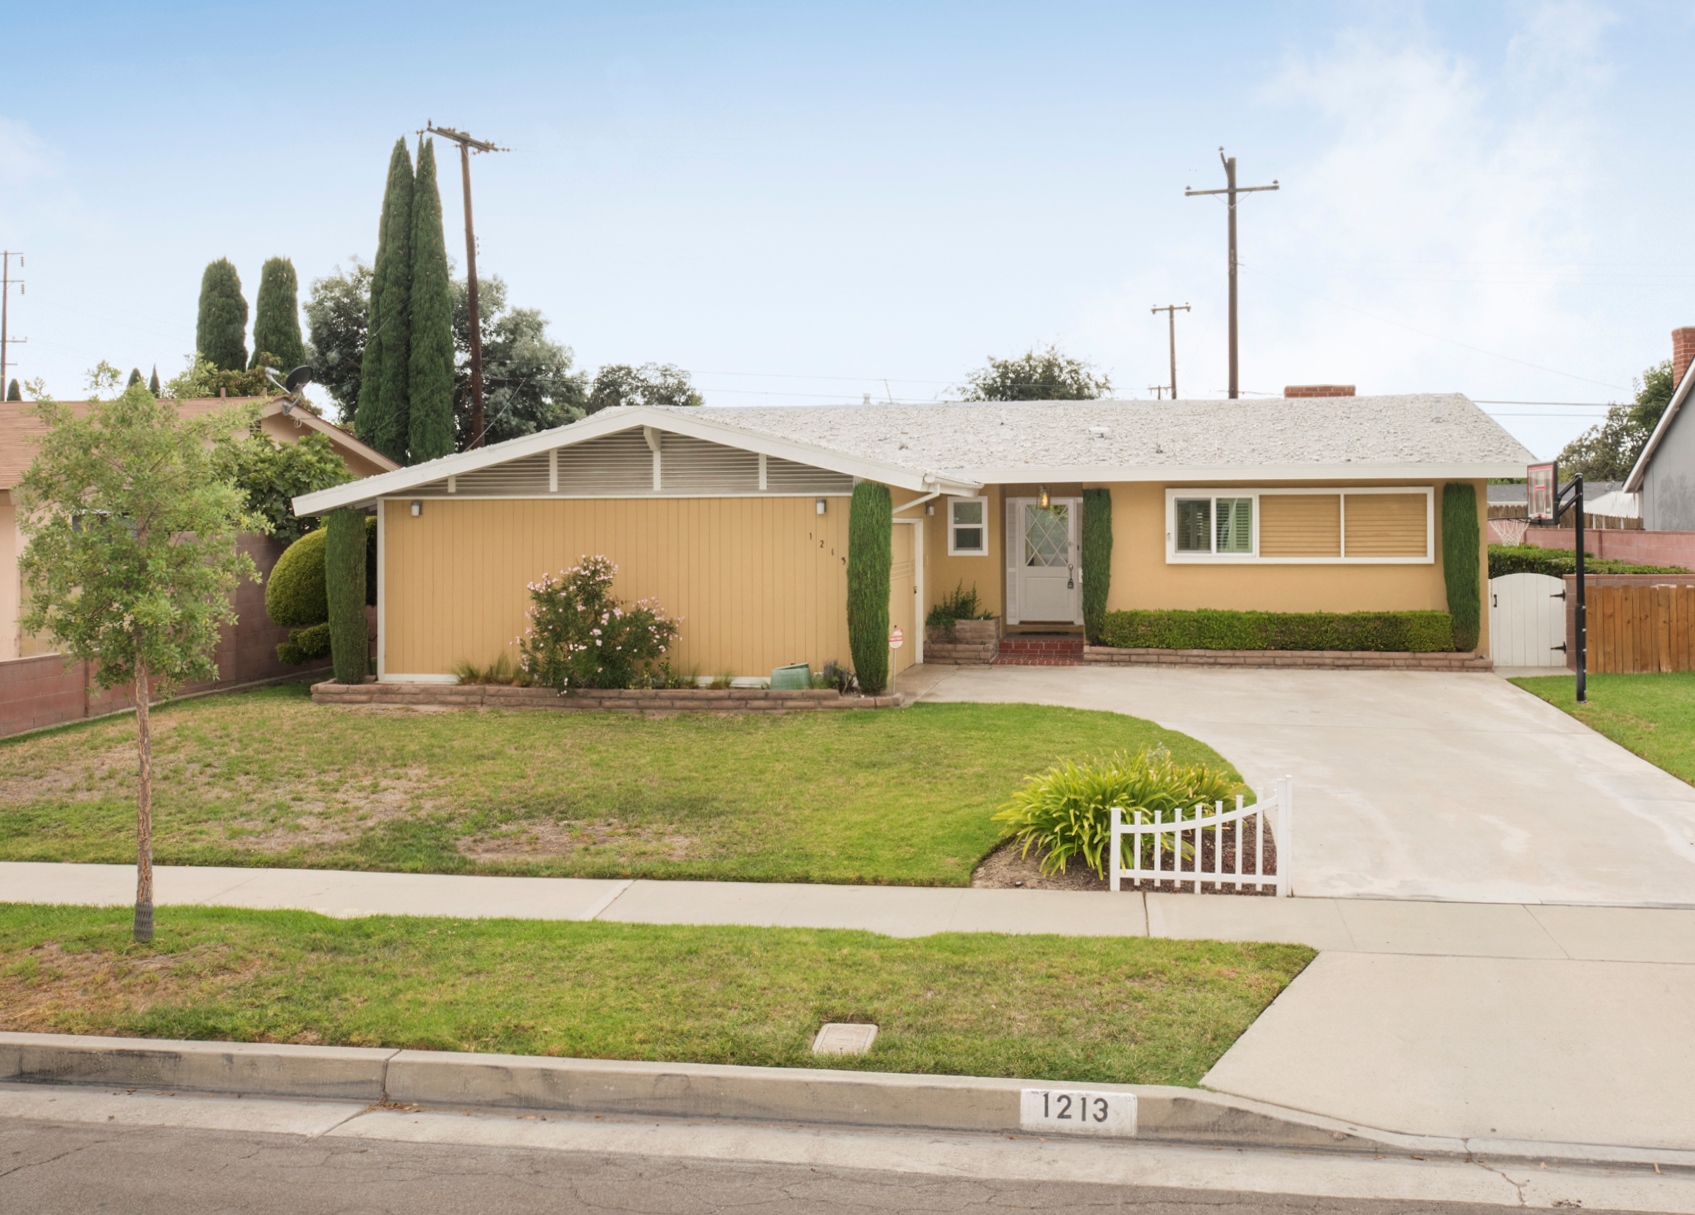 1213 S. Orchard Ave., Fullerton, CA 92833